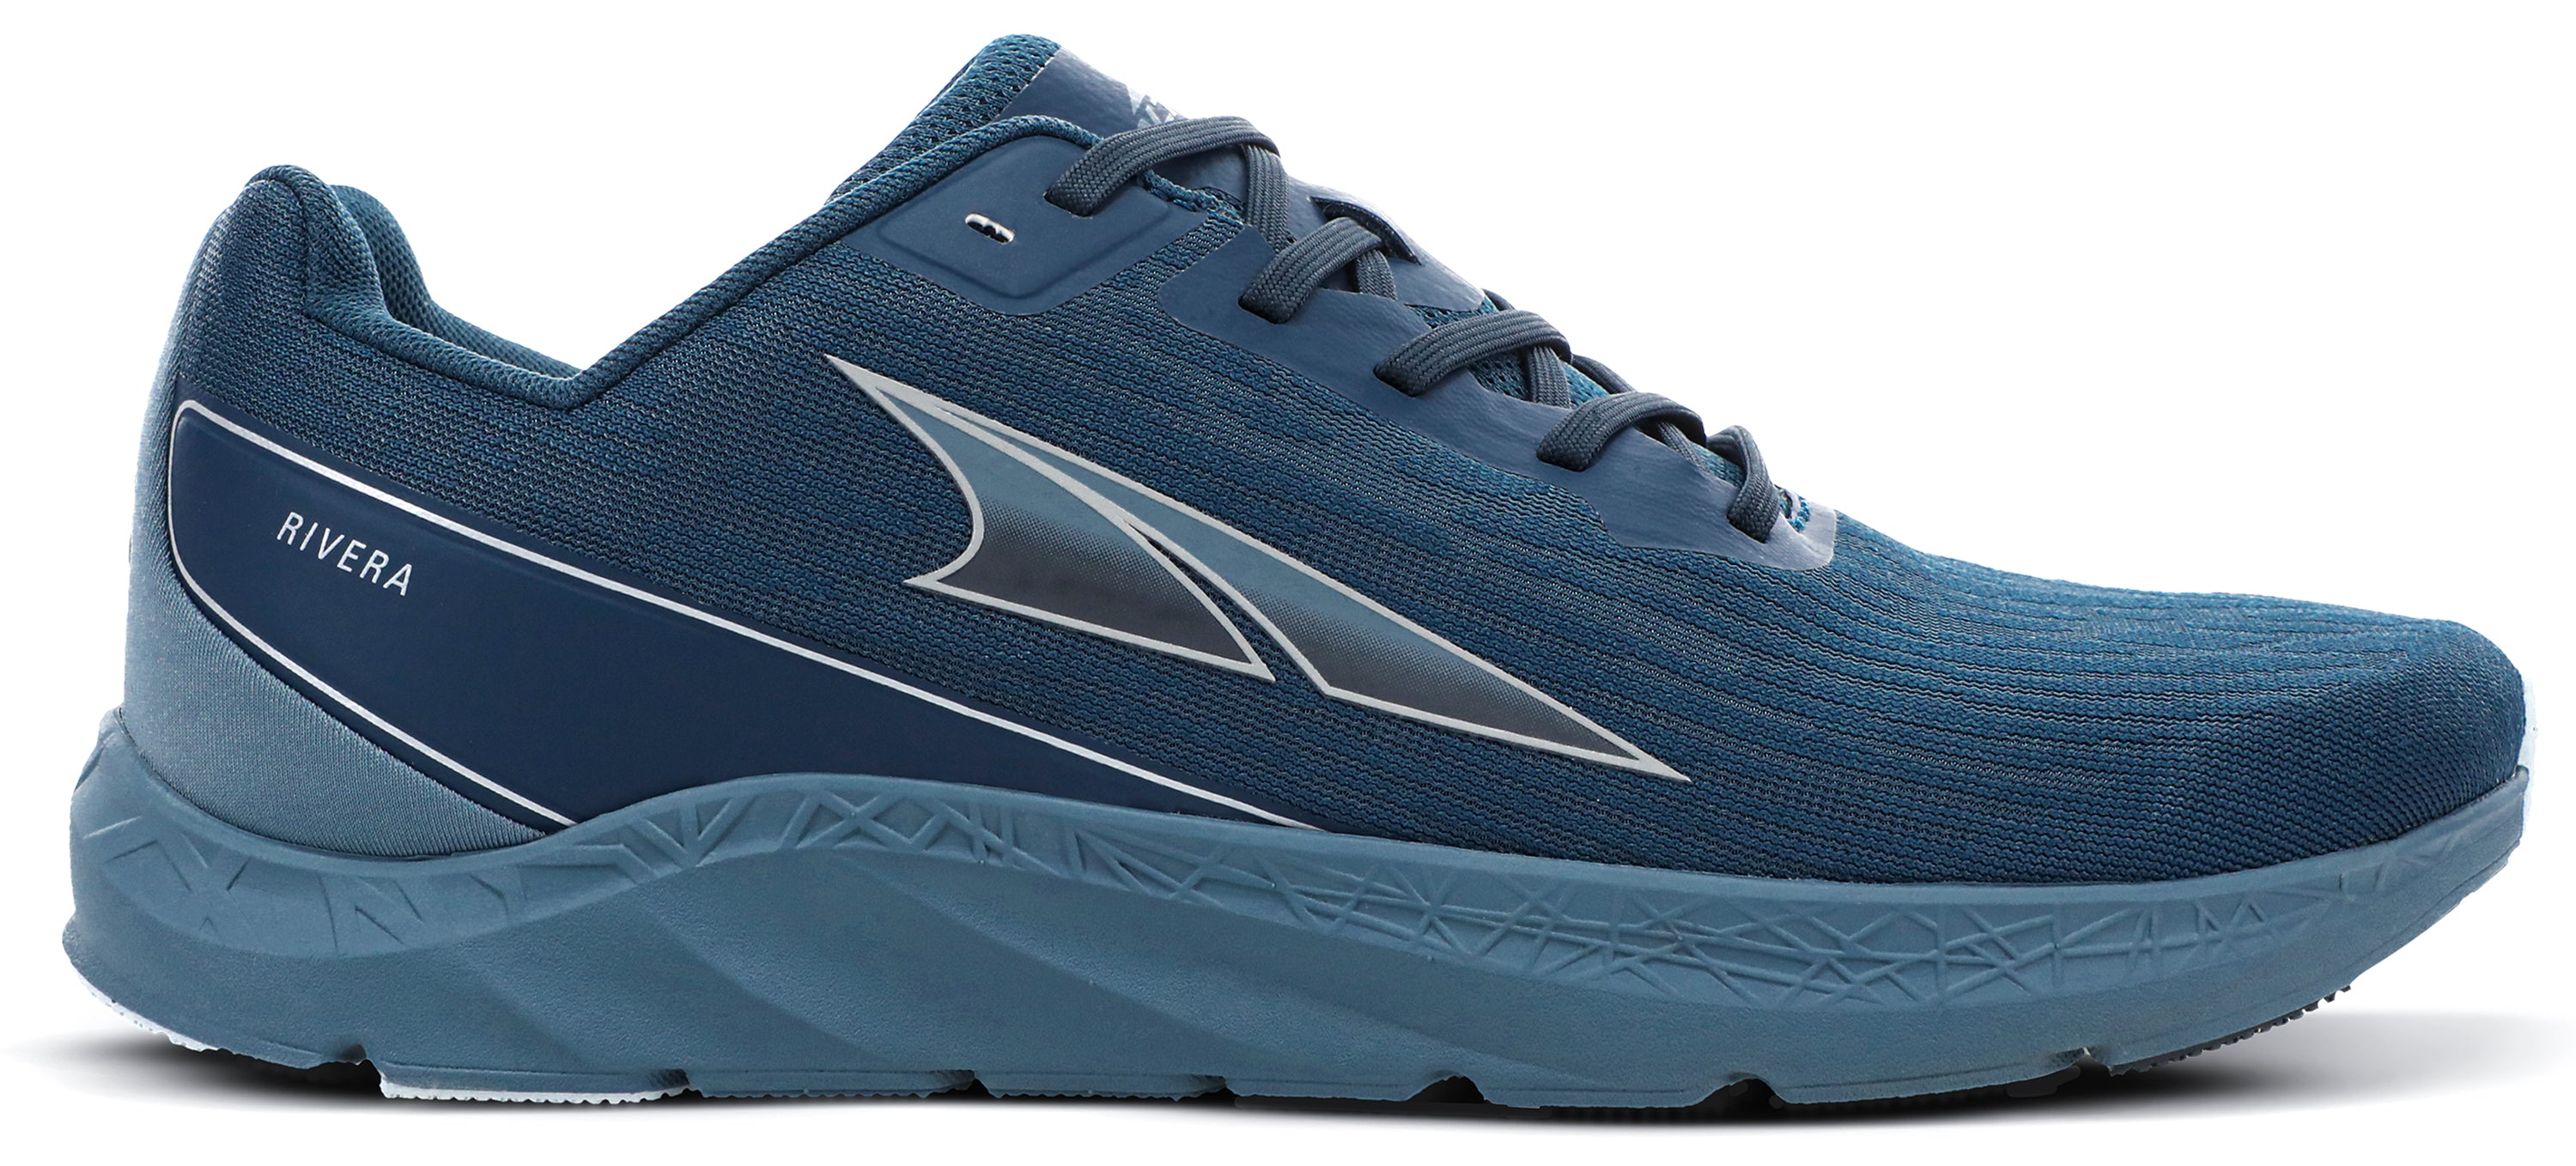 Altra Men's Rivera Road Running Shoe in Majolica Blue from the side